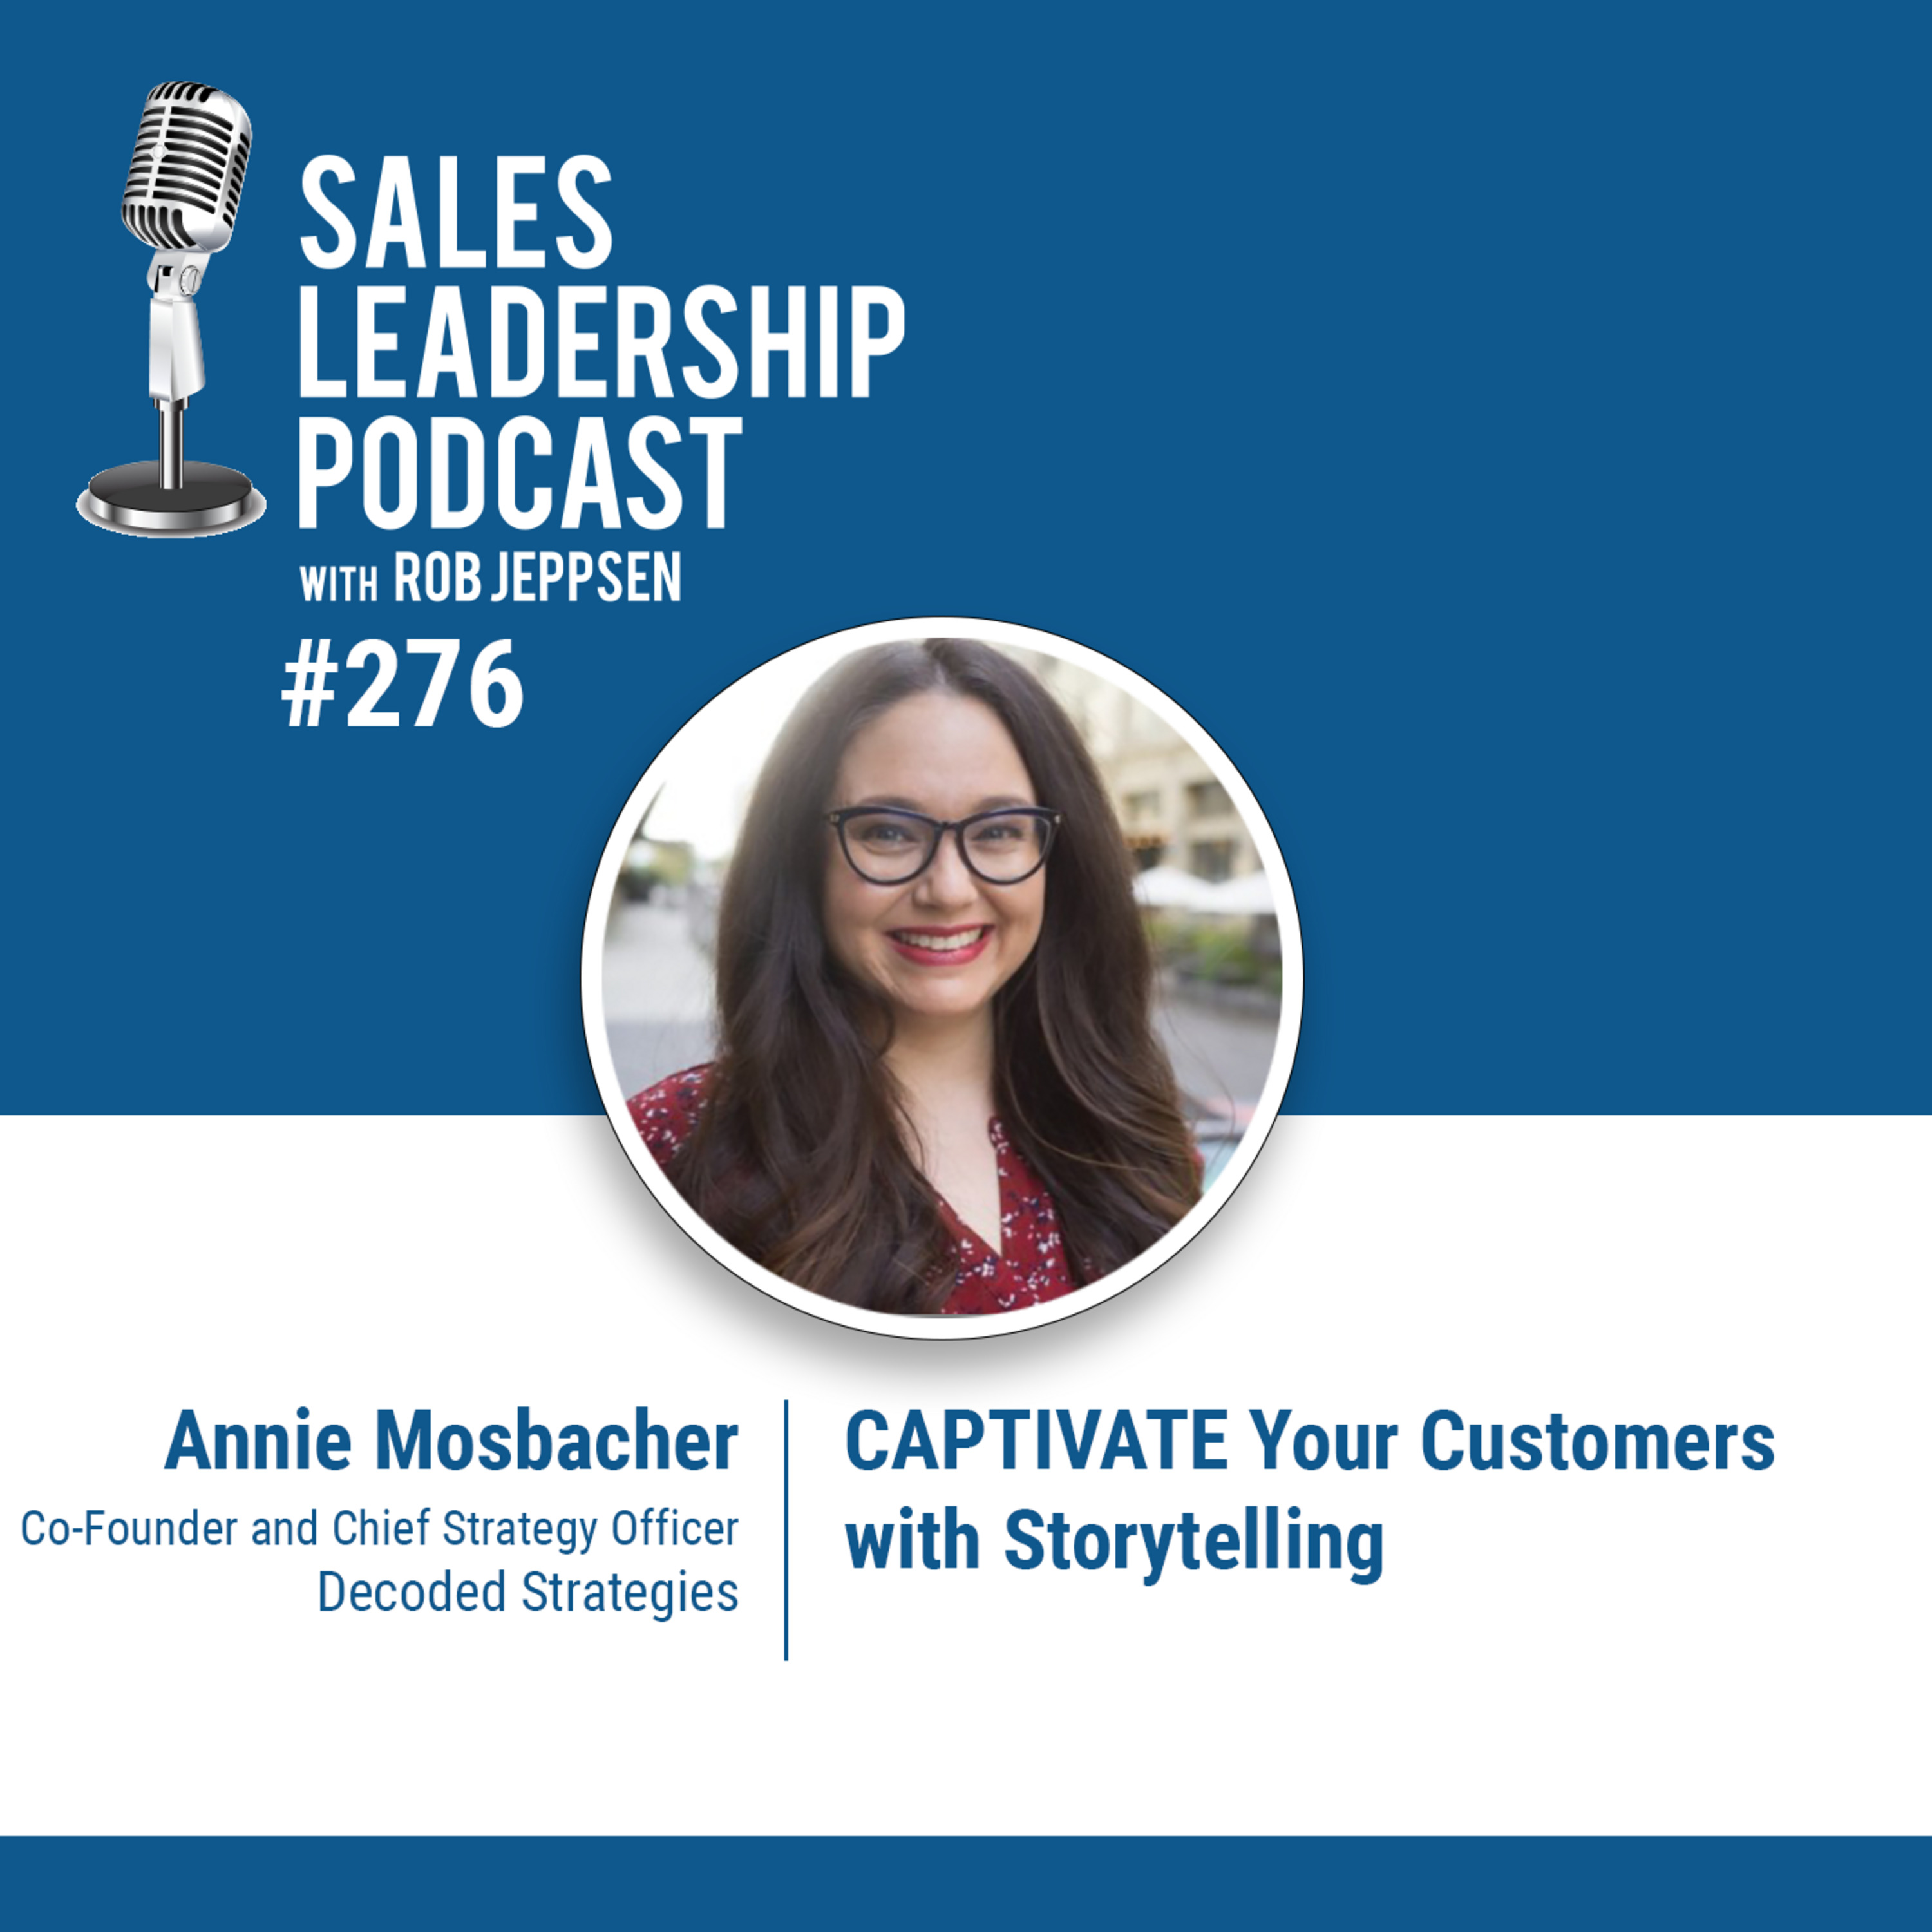 Episode 276: Annie Mosbacher, Chief Strategy Officer and Co-Founder of Decoded Strategies: CAPTIVATE Your Customers with Storytelling